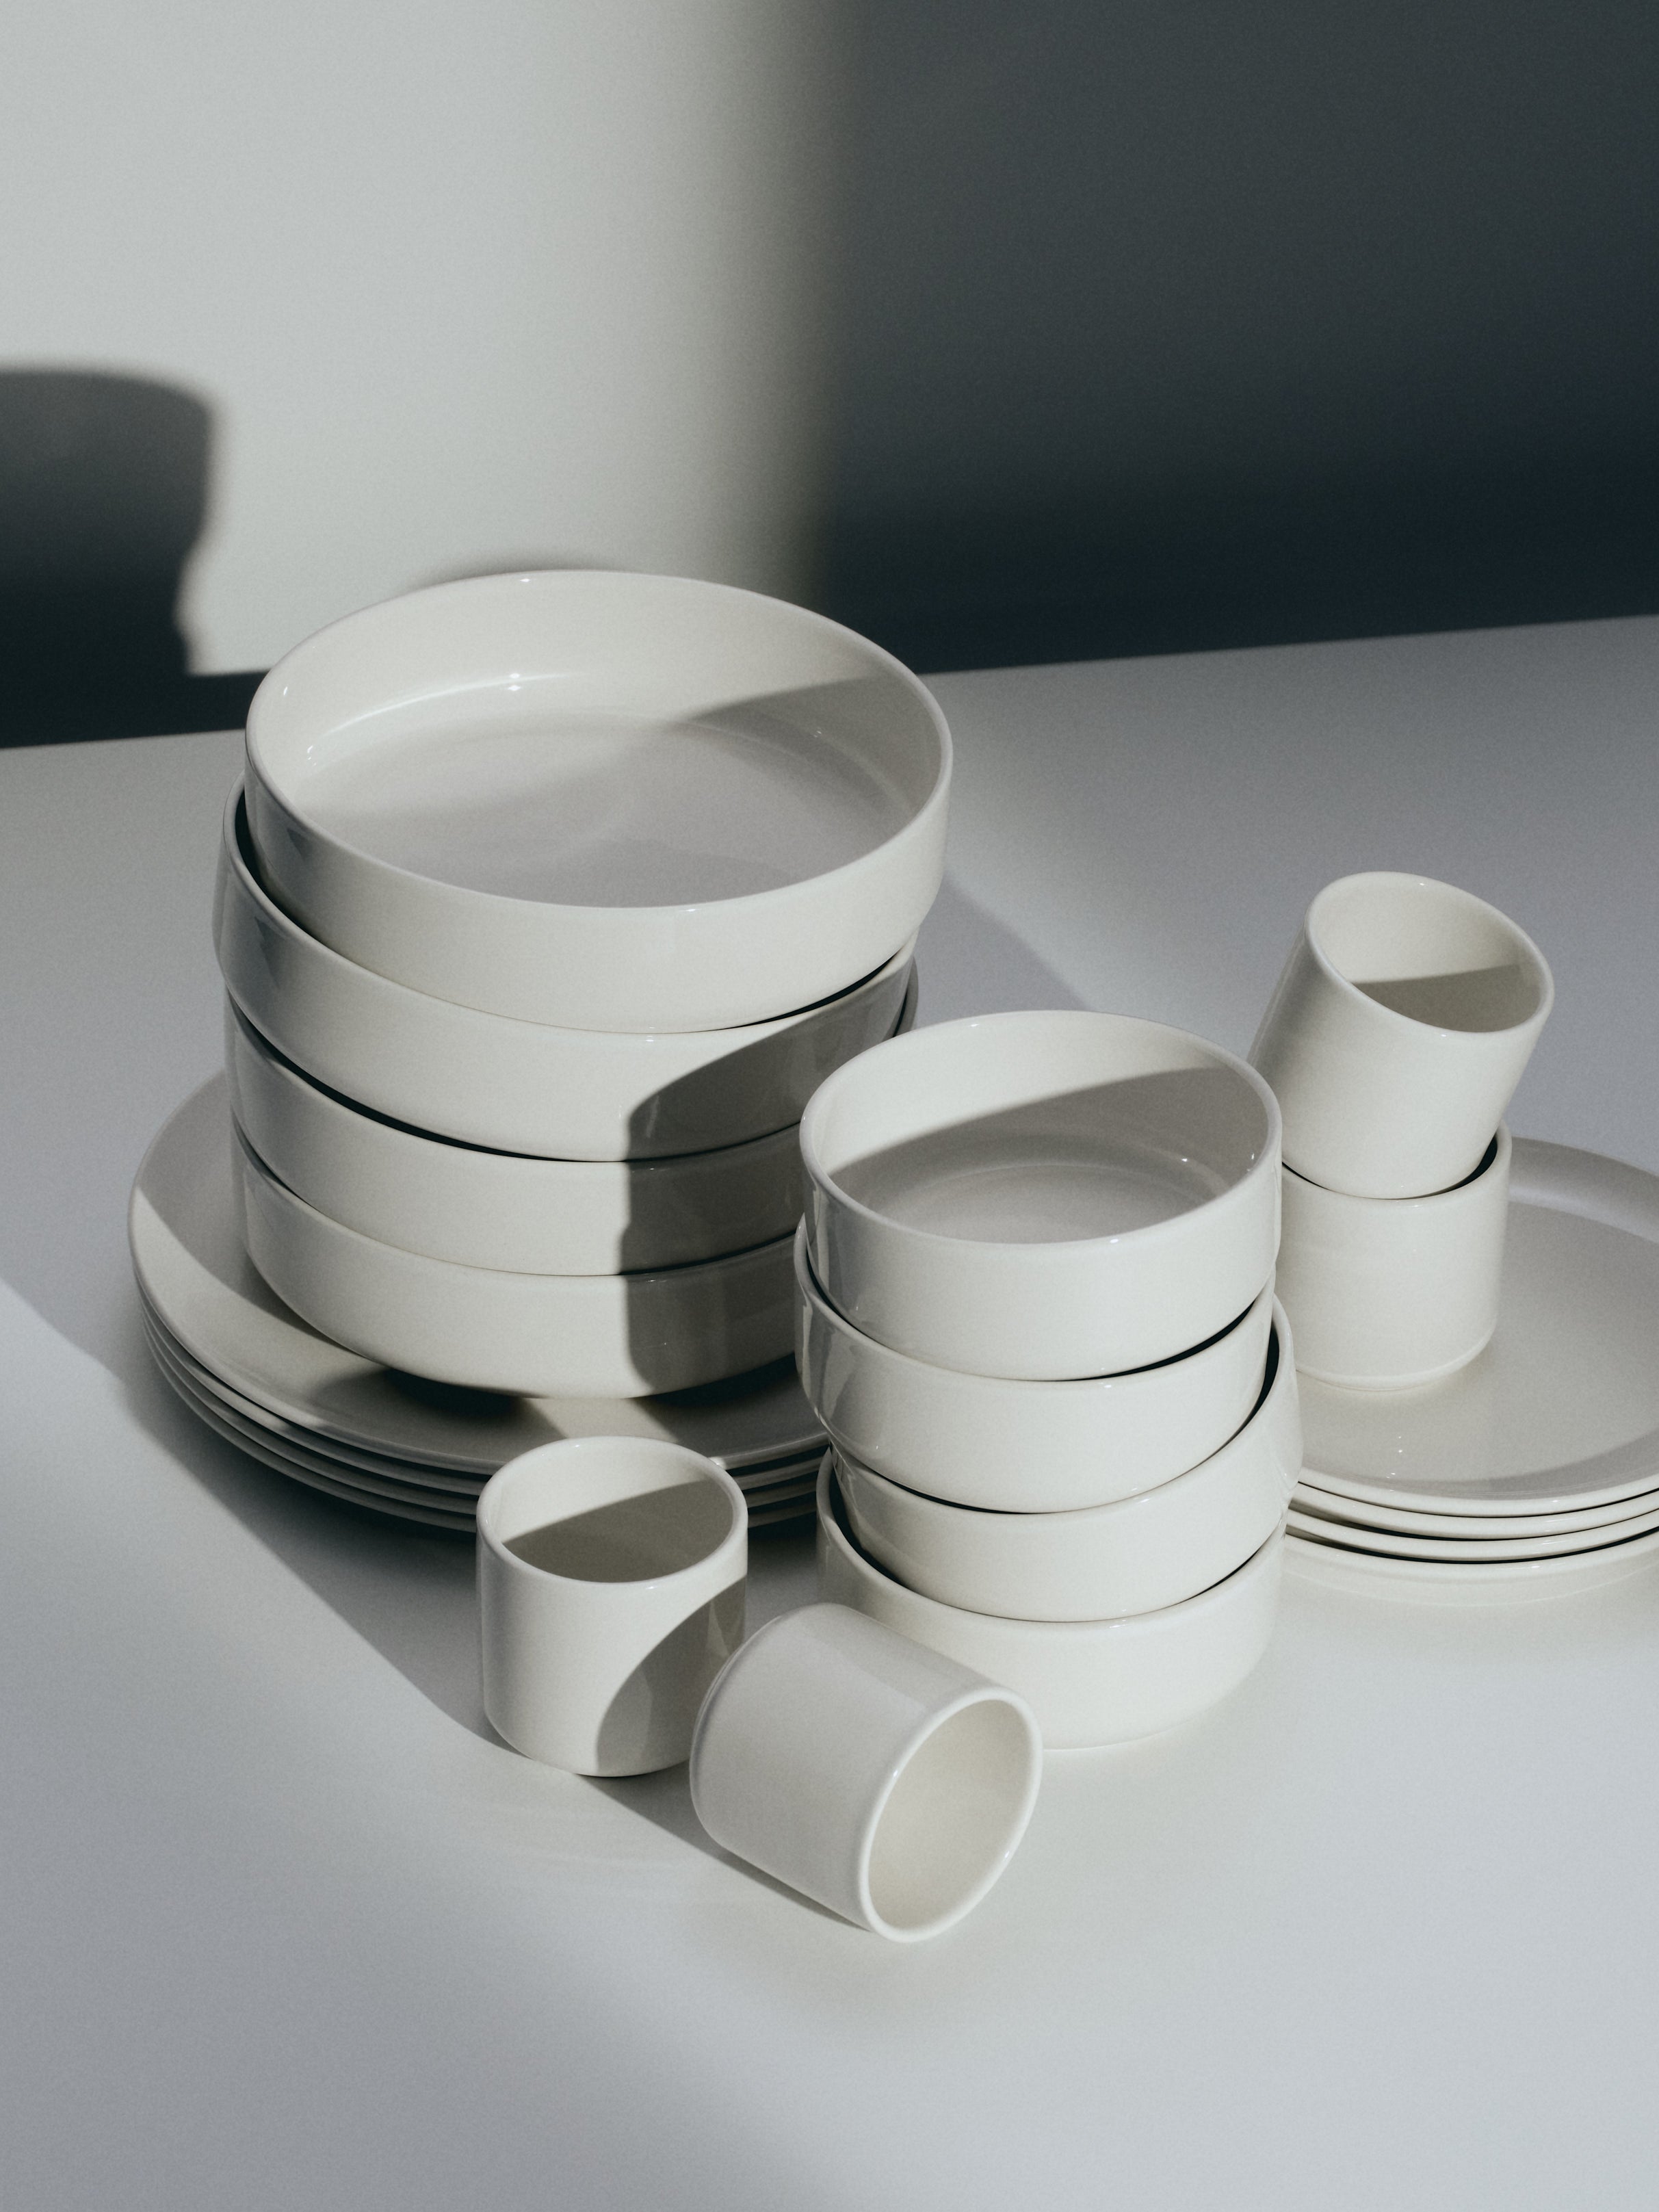 Small tableware set, 20 pieces